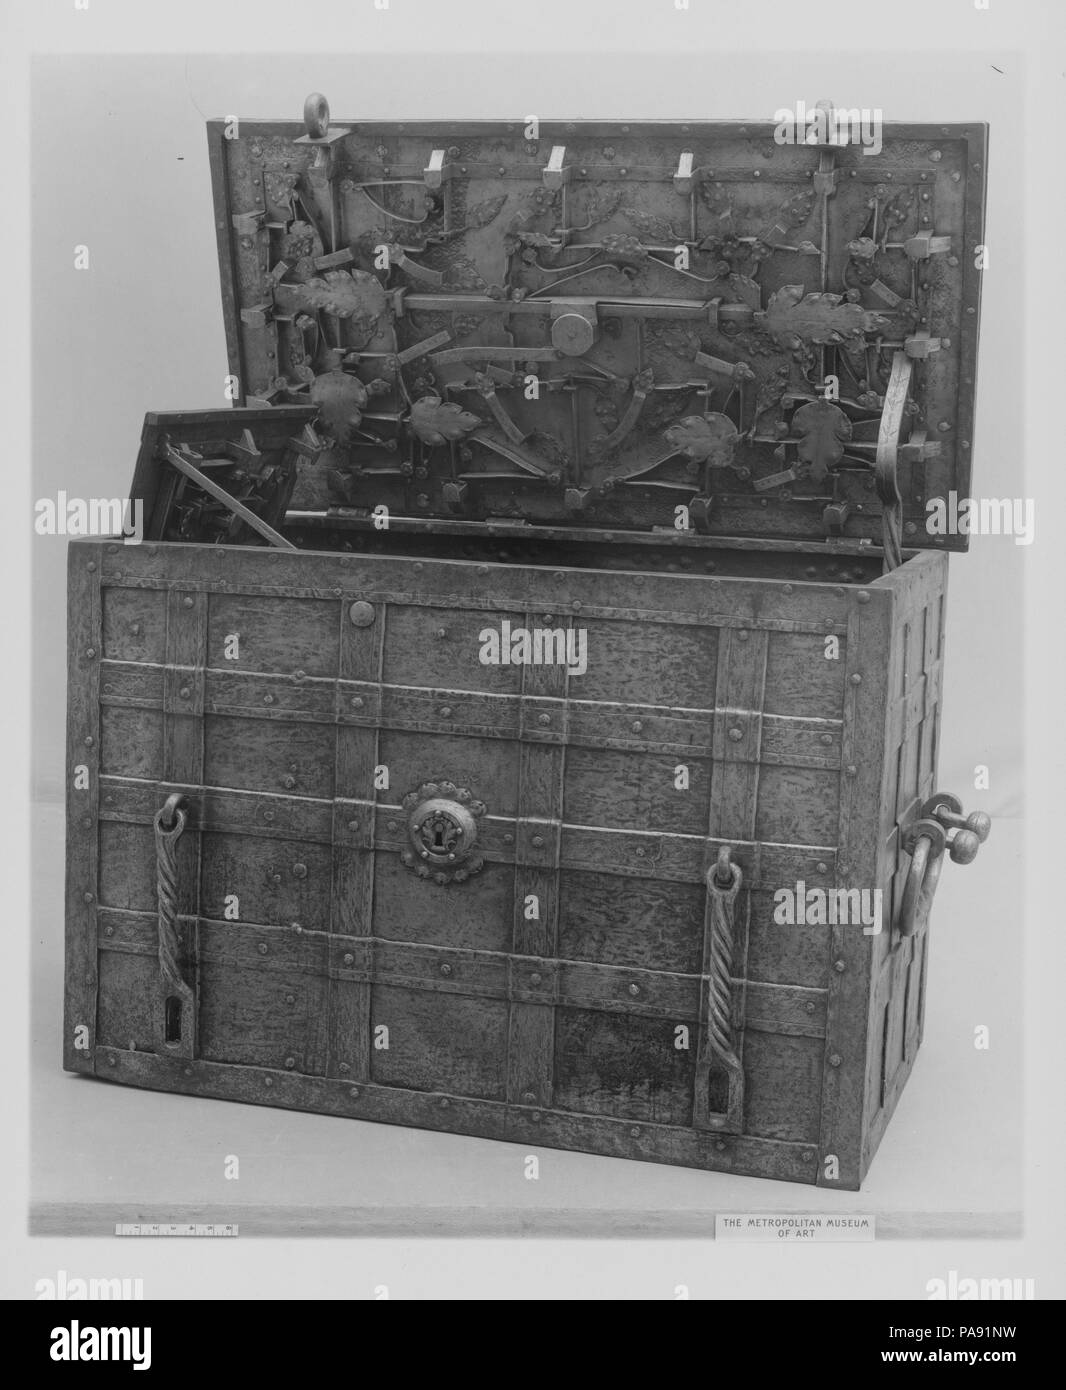 Strongbox. Culture: German, possibly Nuremberg. Dimensions: Overall (confirmed): 35 3/4 × 51 in., 768 lb. (90.8 × 129.5 cm, 348.4 kg). Date: late 16th or early 17th century.  This formidable steel strongbox is reinforced with an armature of the same material. Its elaborate locking mechanism, consisting of nine bolts and various leaf-shaped shields, offered the owner a safe storage place for his valuables. Corresponding to the eyes along the rim of the lid, the two pendant hasps in front allowed the use of additional padlocks. Nuremberg and the neighboring town of Augsburg were major metal-prod Stock Photo